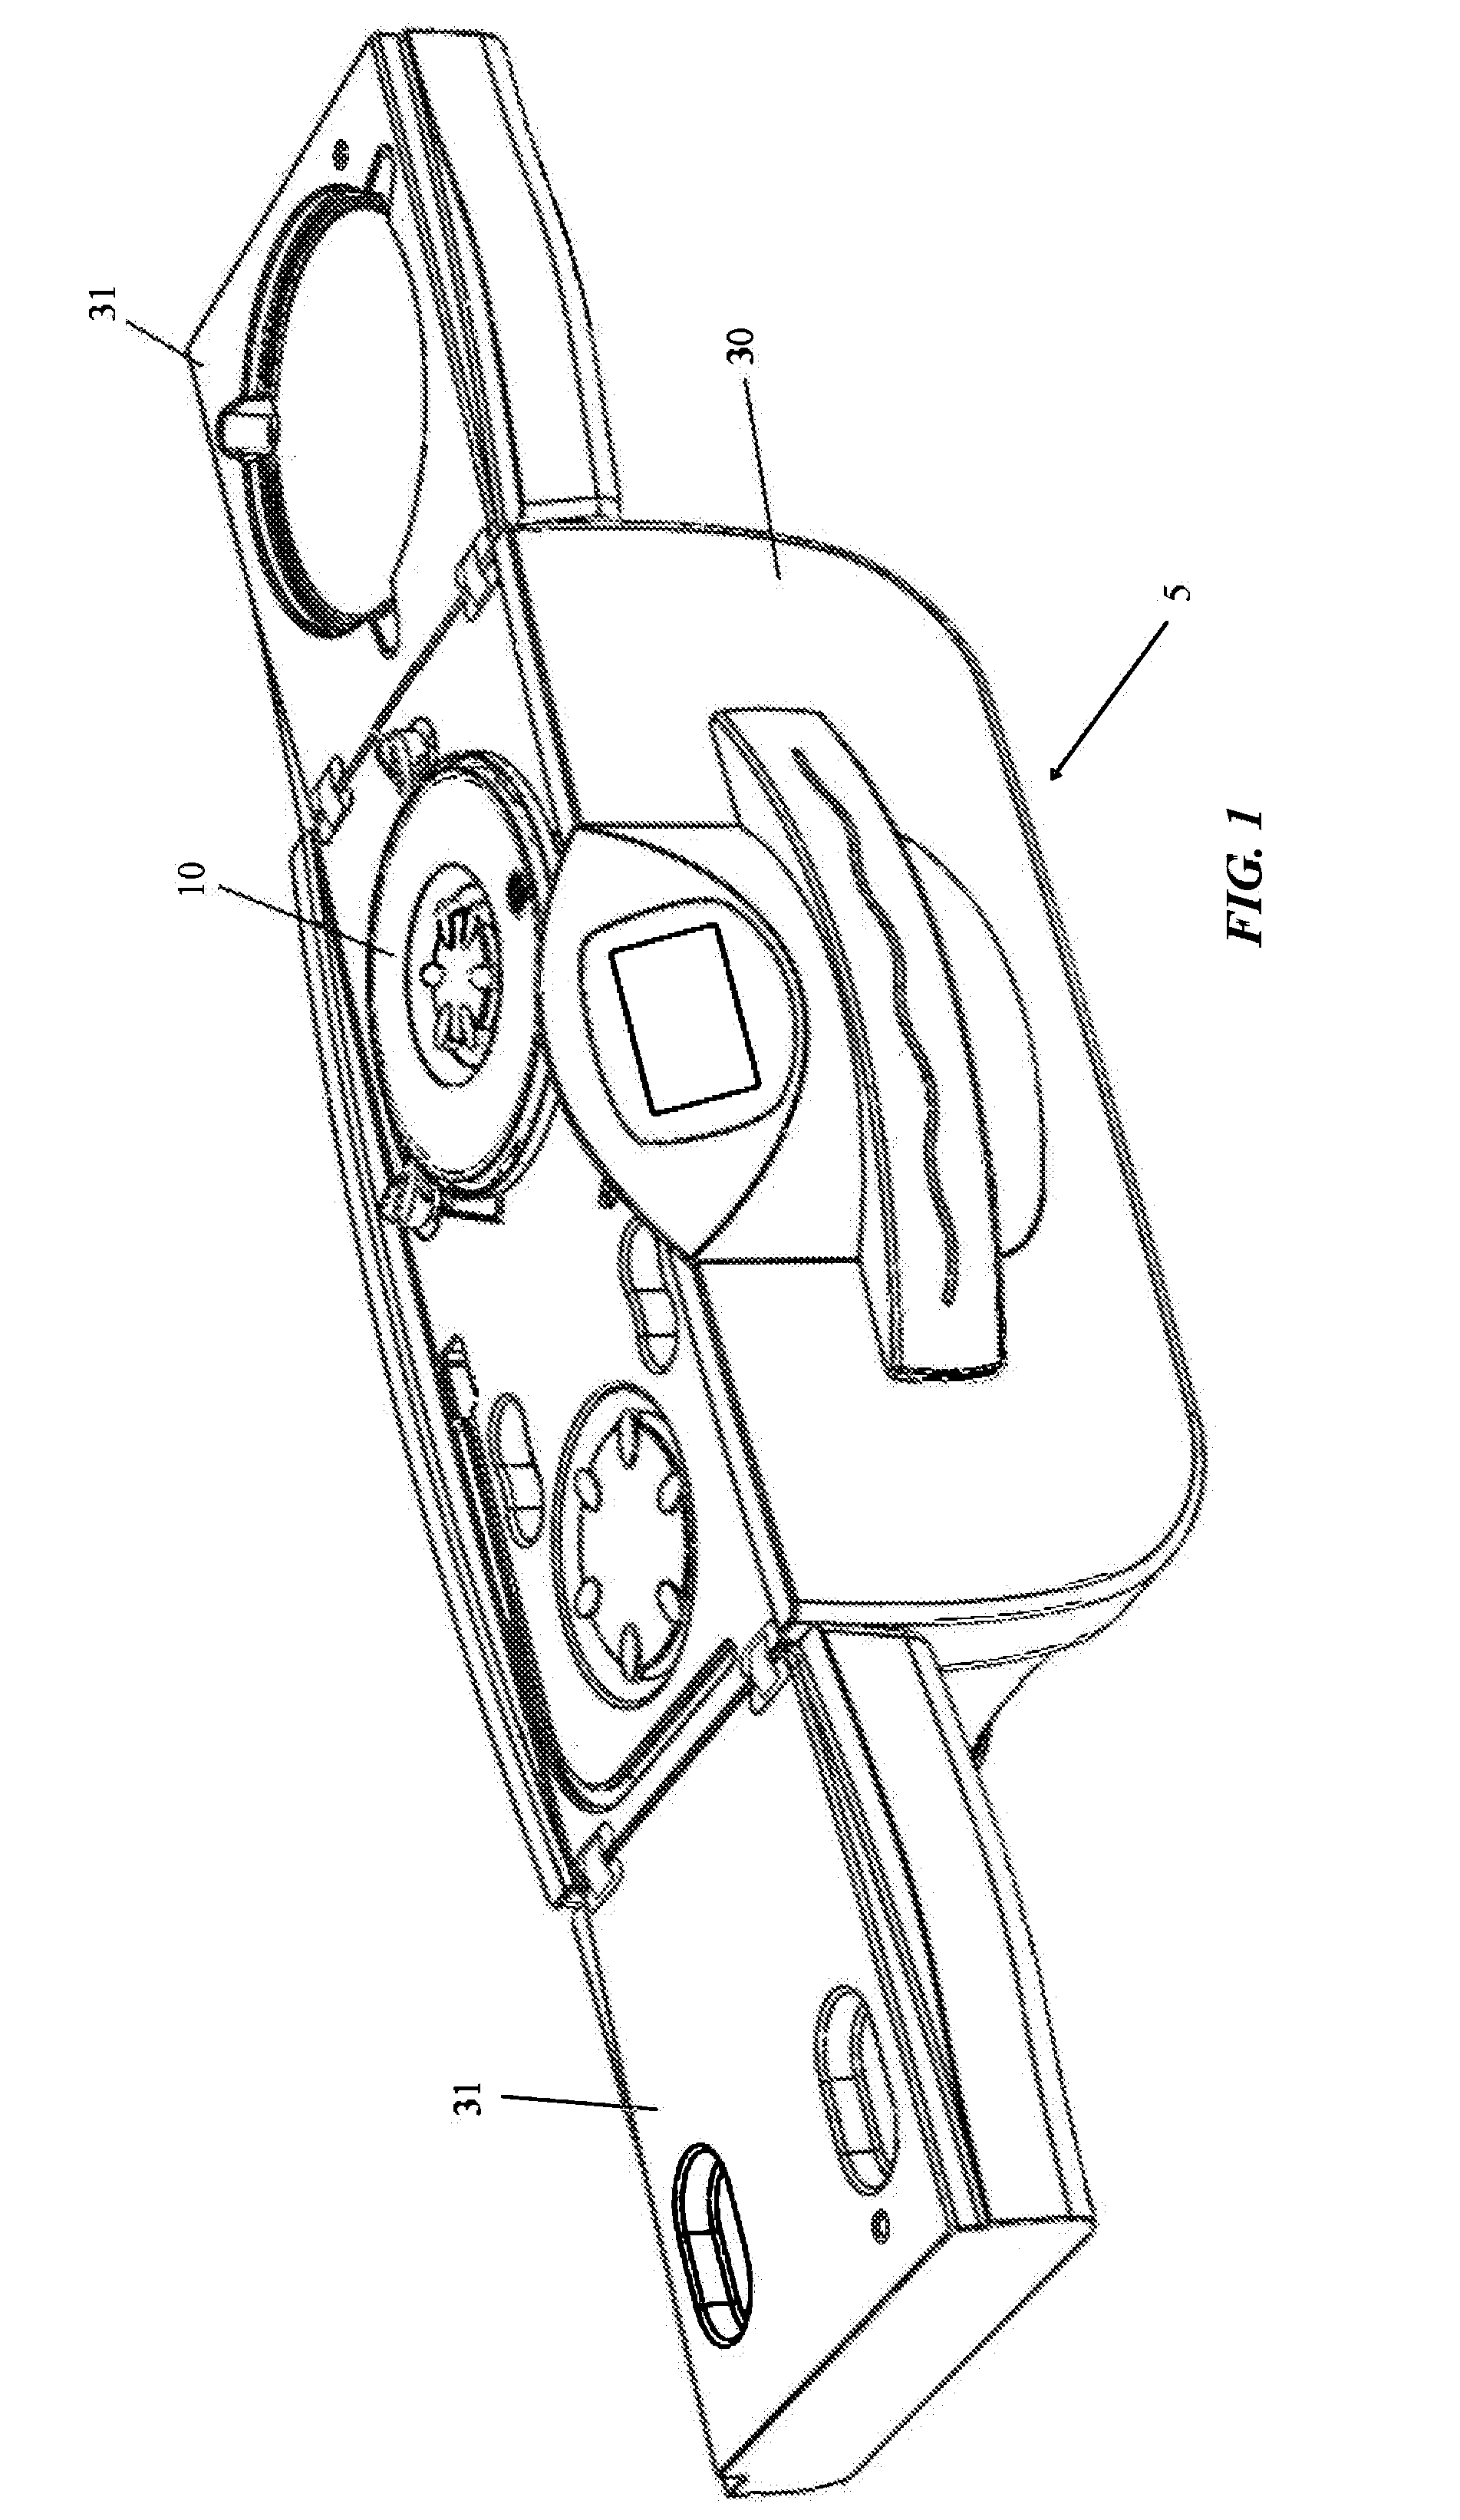 Systems and methods for preserving a human organ for transplantation